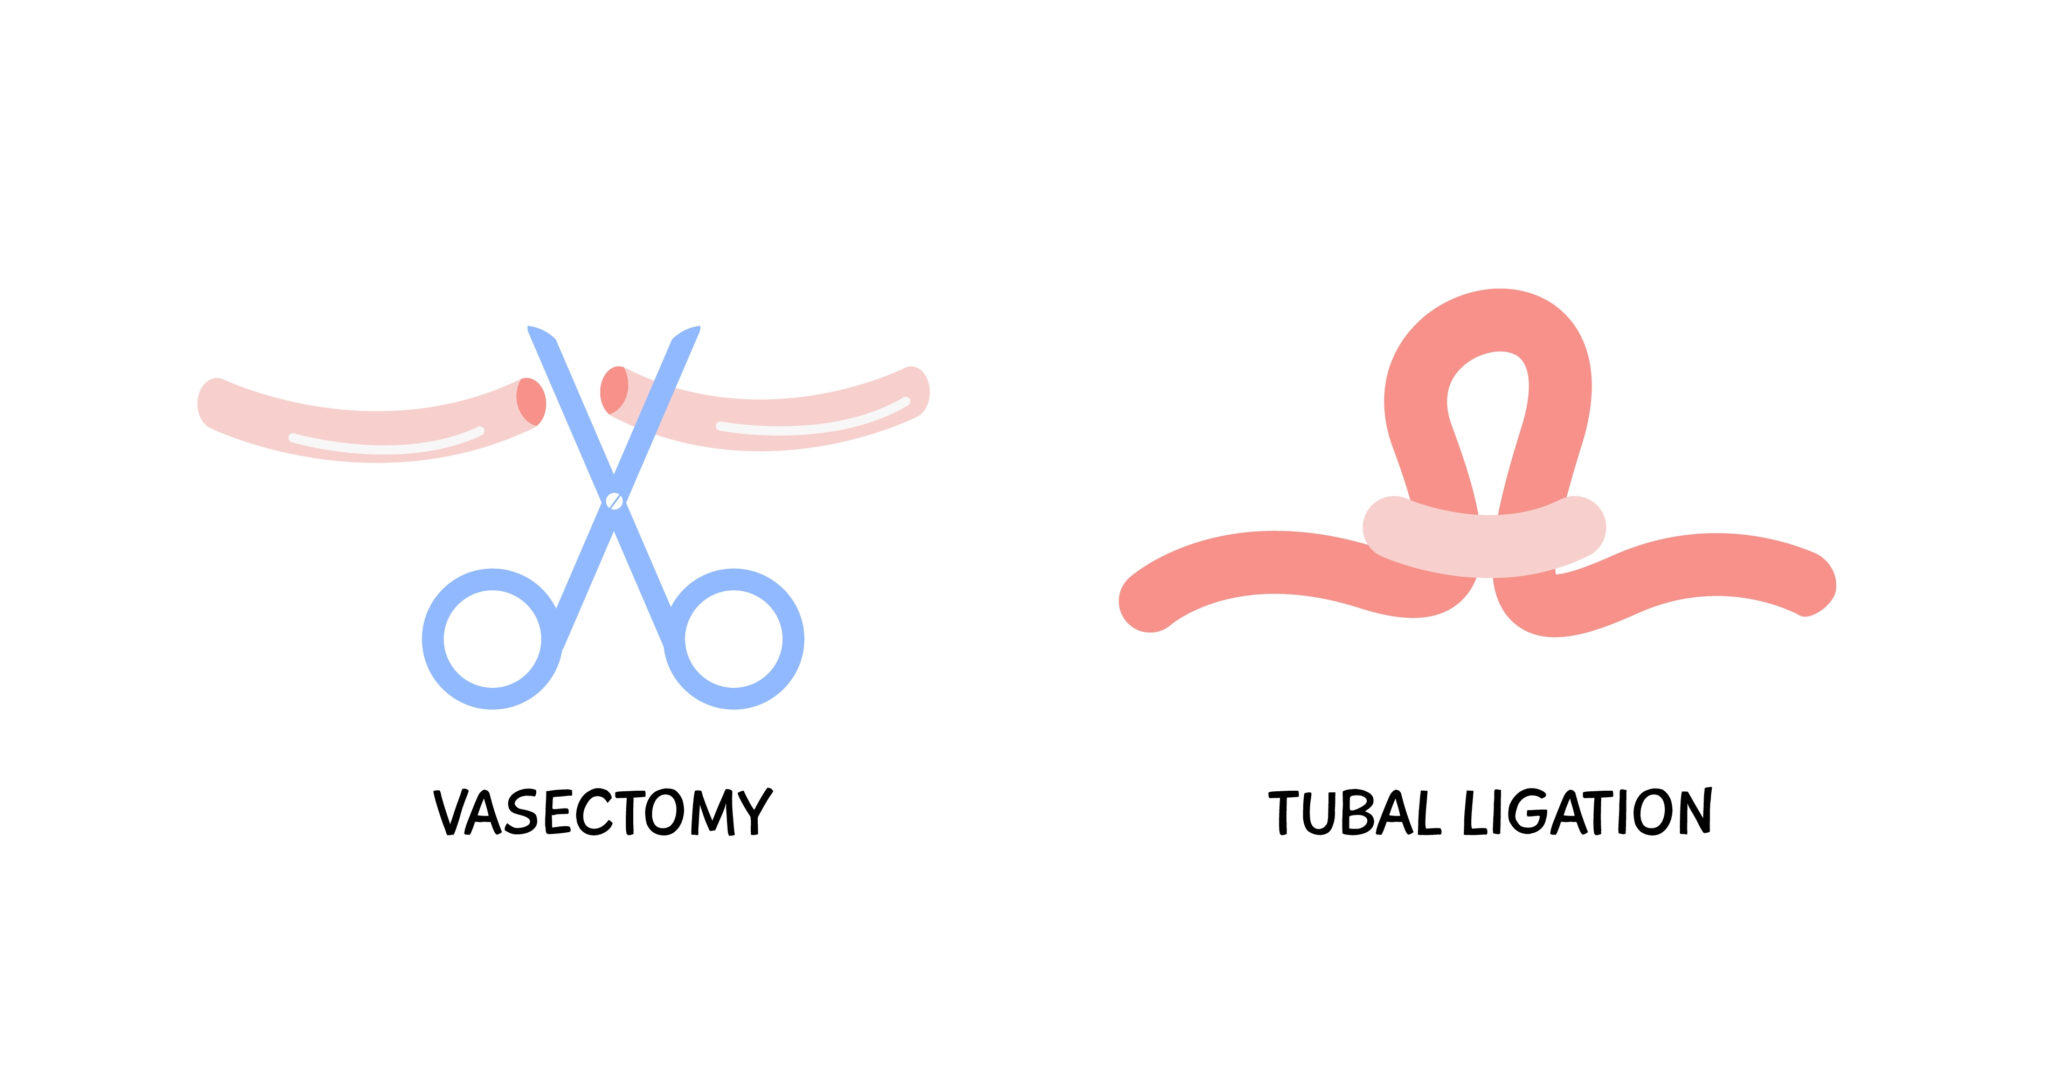 Diagram showing the difference between tubal litigation vs vasectomy